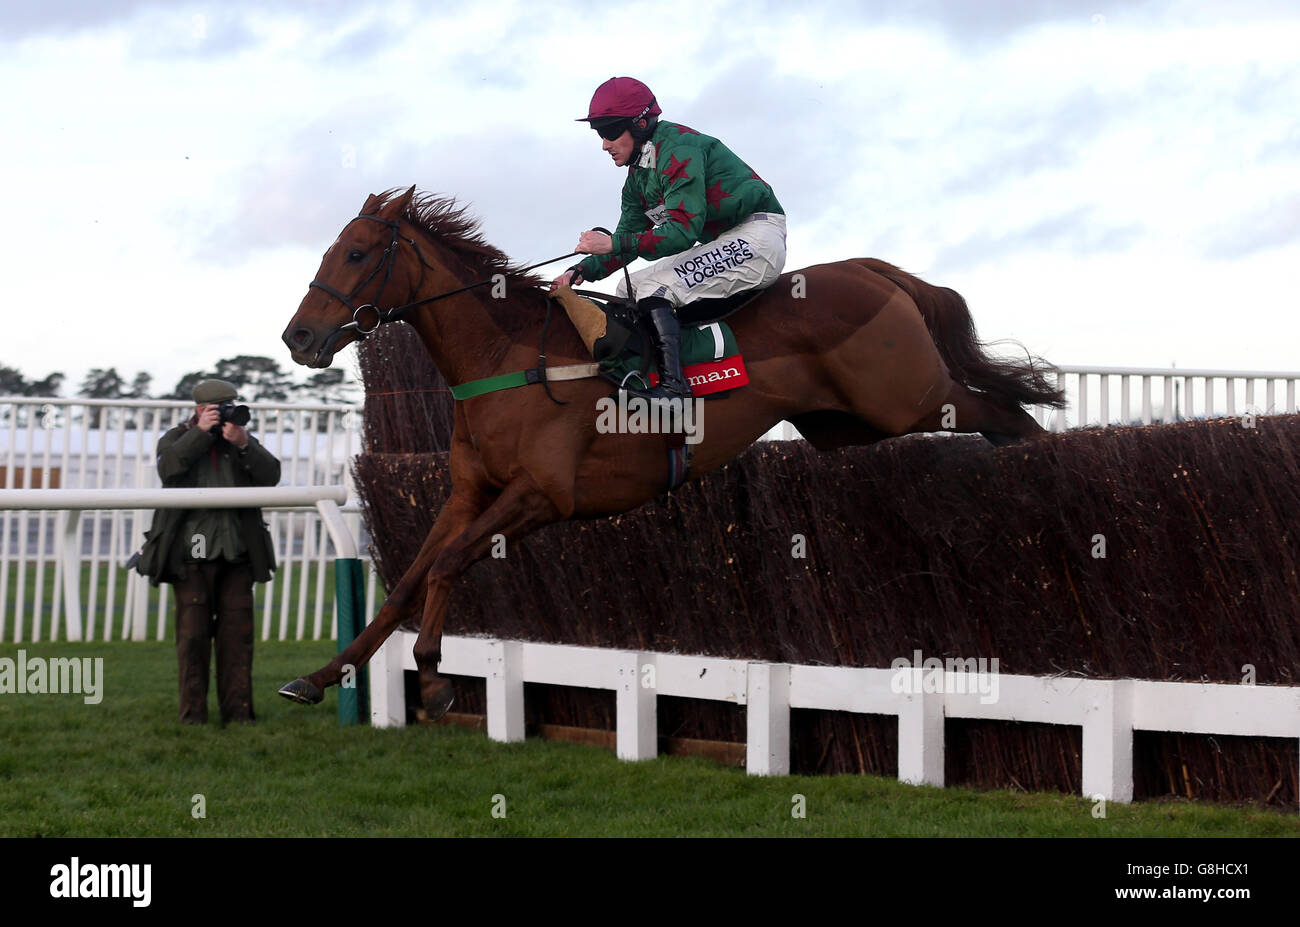 Knock House ridden by jockey Brian Hughes clear a fence during the Ryman Stationery Handicap Chase Stock Photo